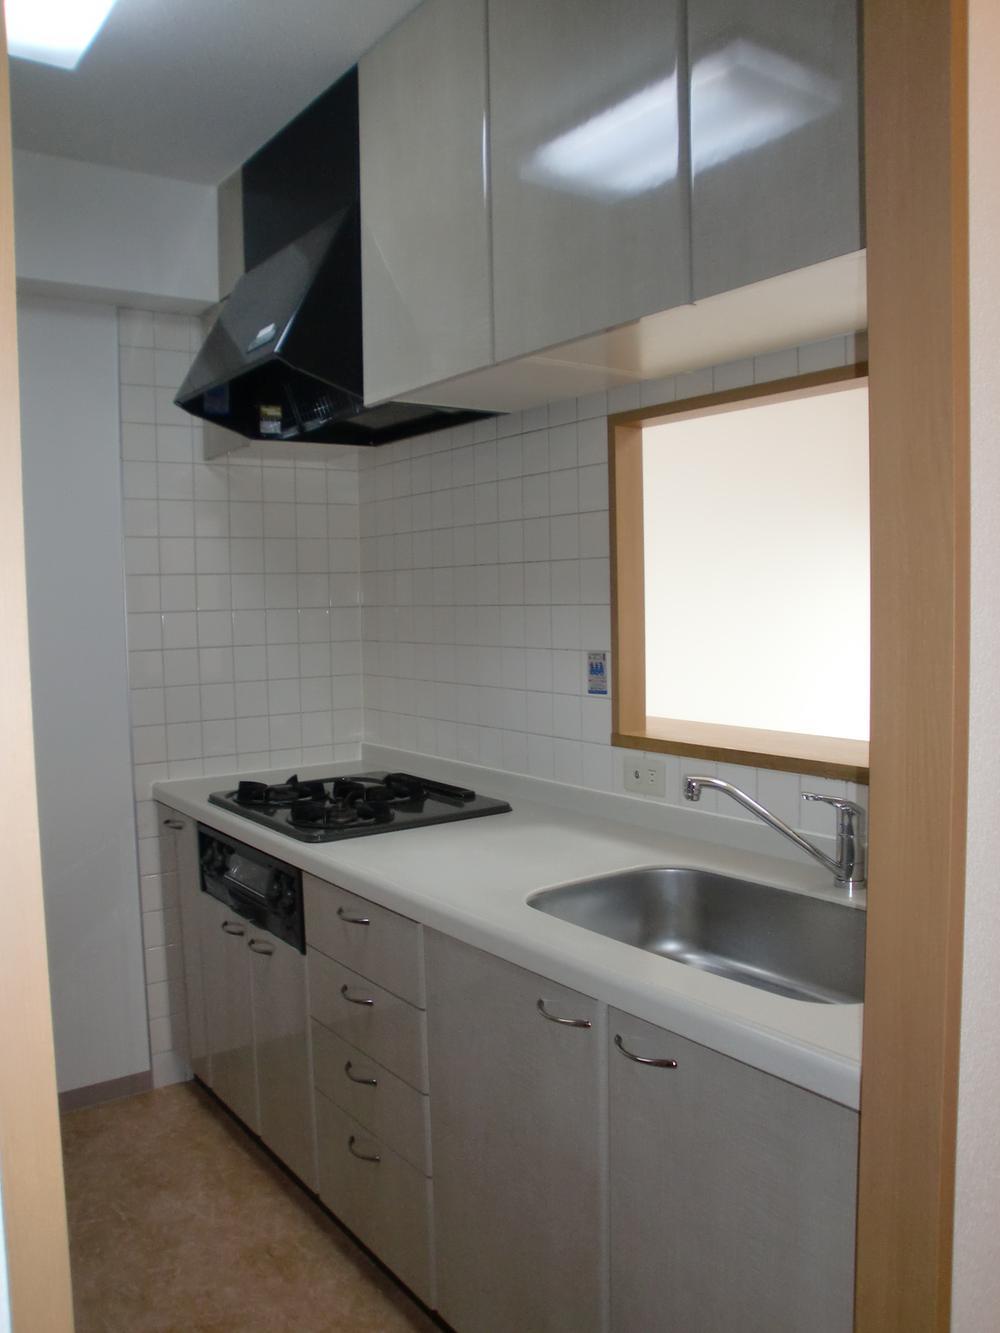 Kitchen. It is settled replacement stove new. Bright color kitchen door panel of.